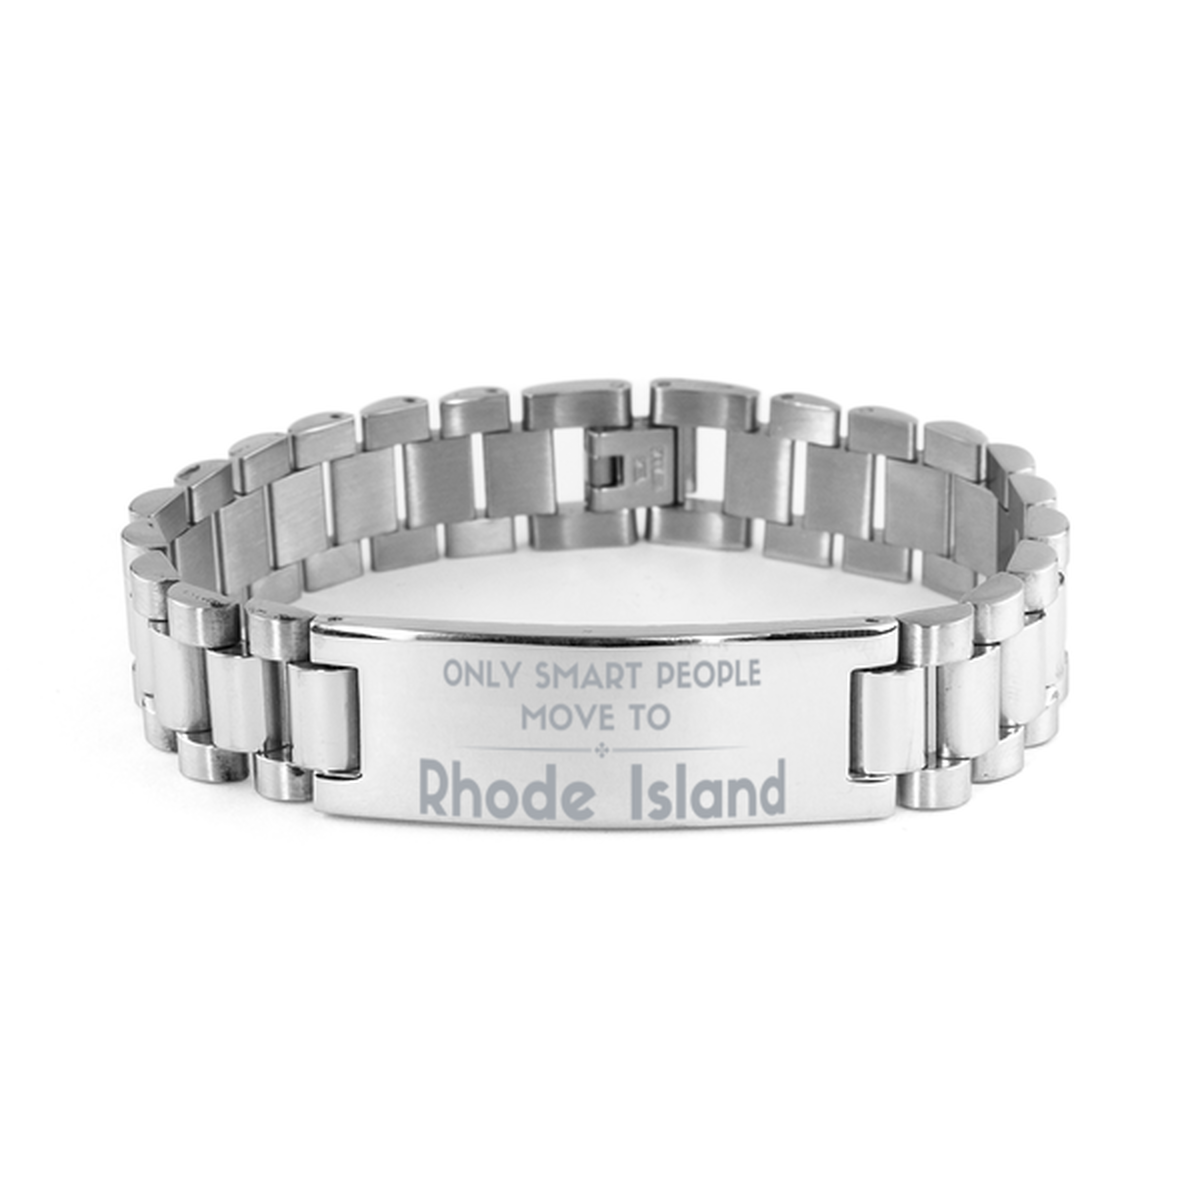 Only smart people move to Rhode Island Ladder Stainless Steel Bracelet, Gag Gifts For Rhode Island, Move to Rhode Island Gifts for Friends Coworker Funny Saying Quote